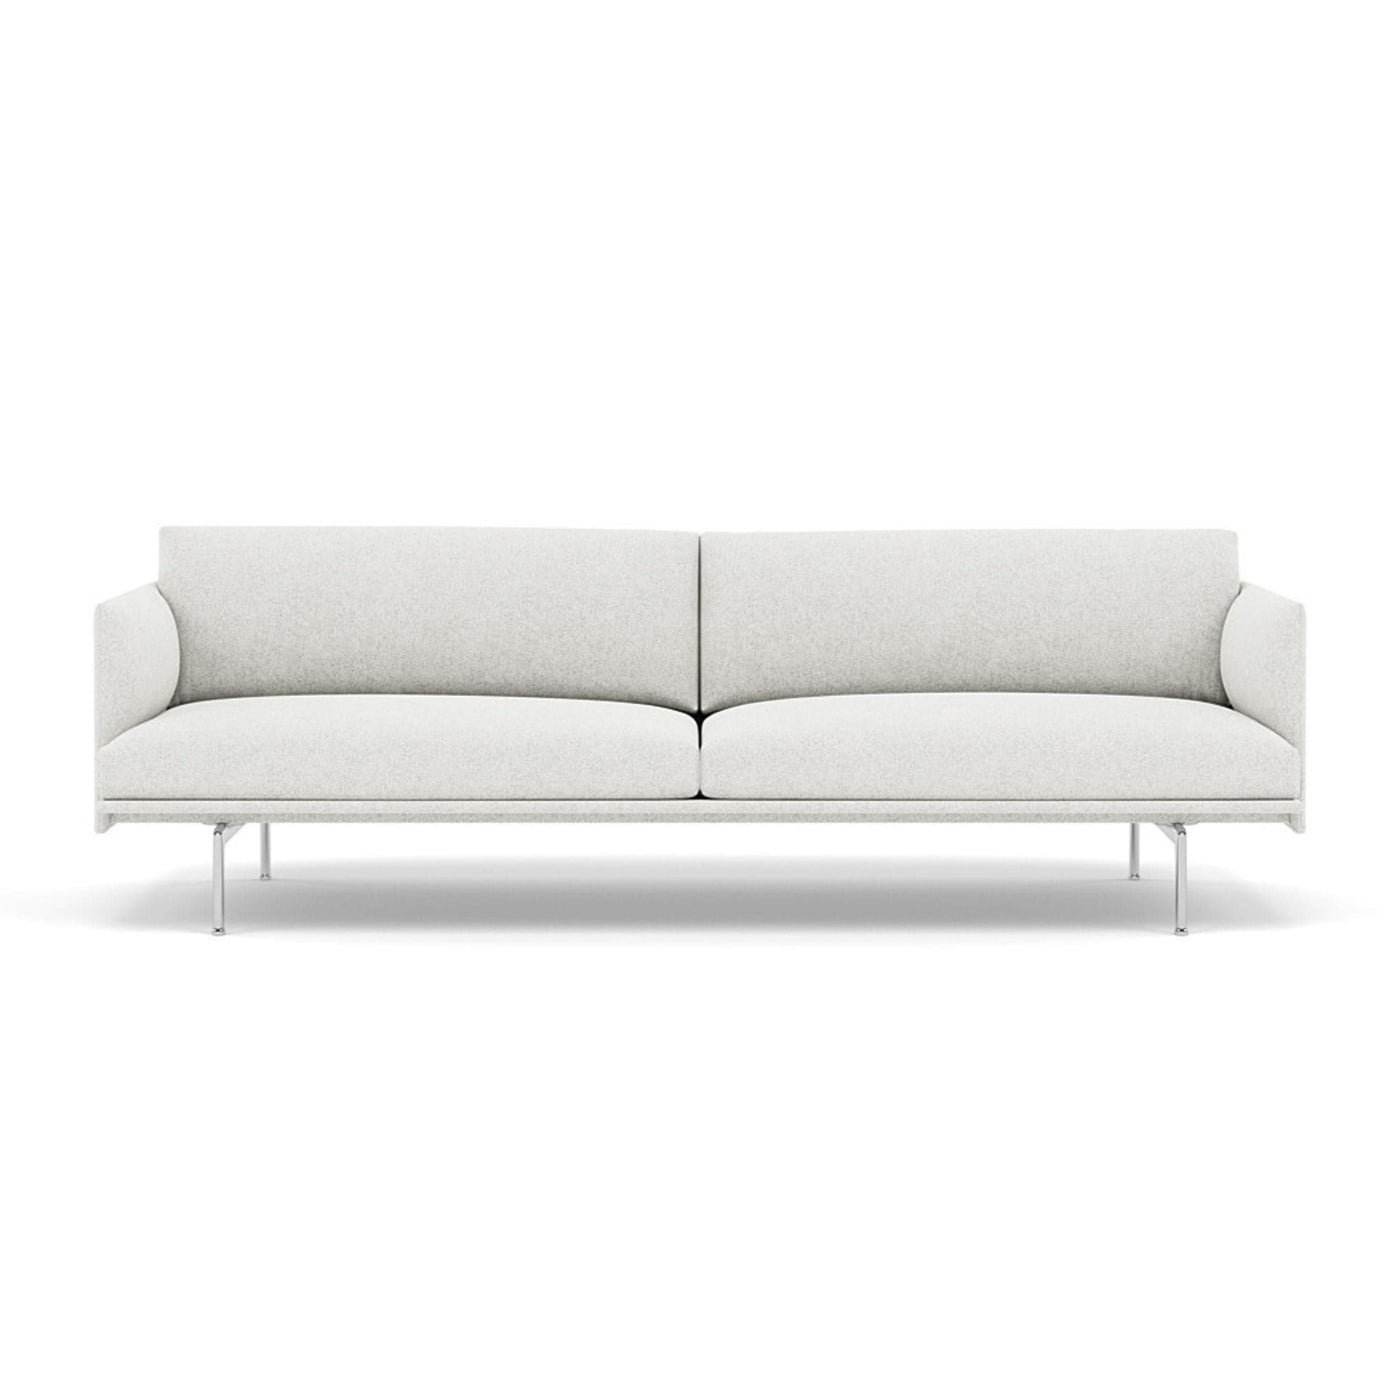 Muuto Outline Studio Sofa 220 in hallingdal 110 and polished aluminium legs. Made to order from someday designs. #colour_hallingdal-110